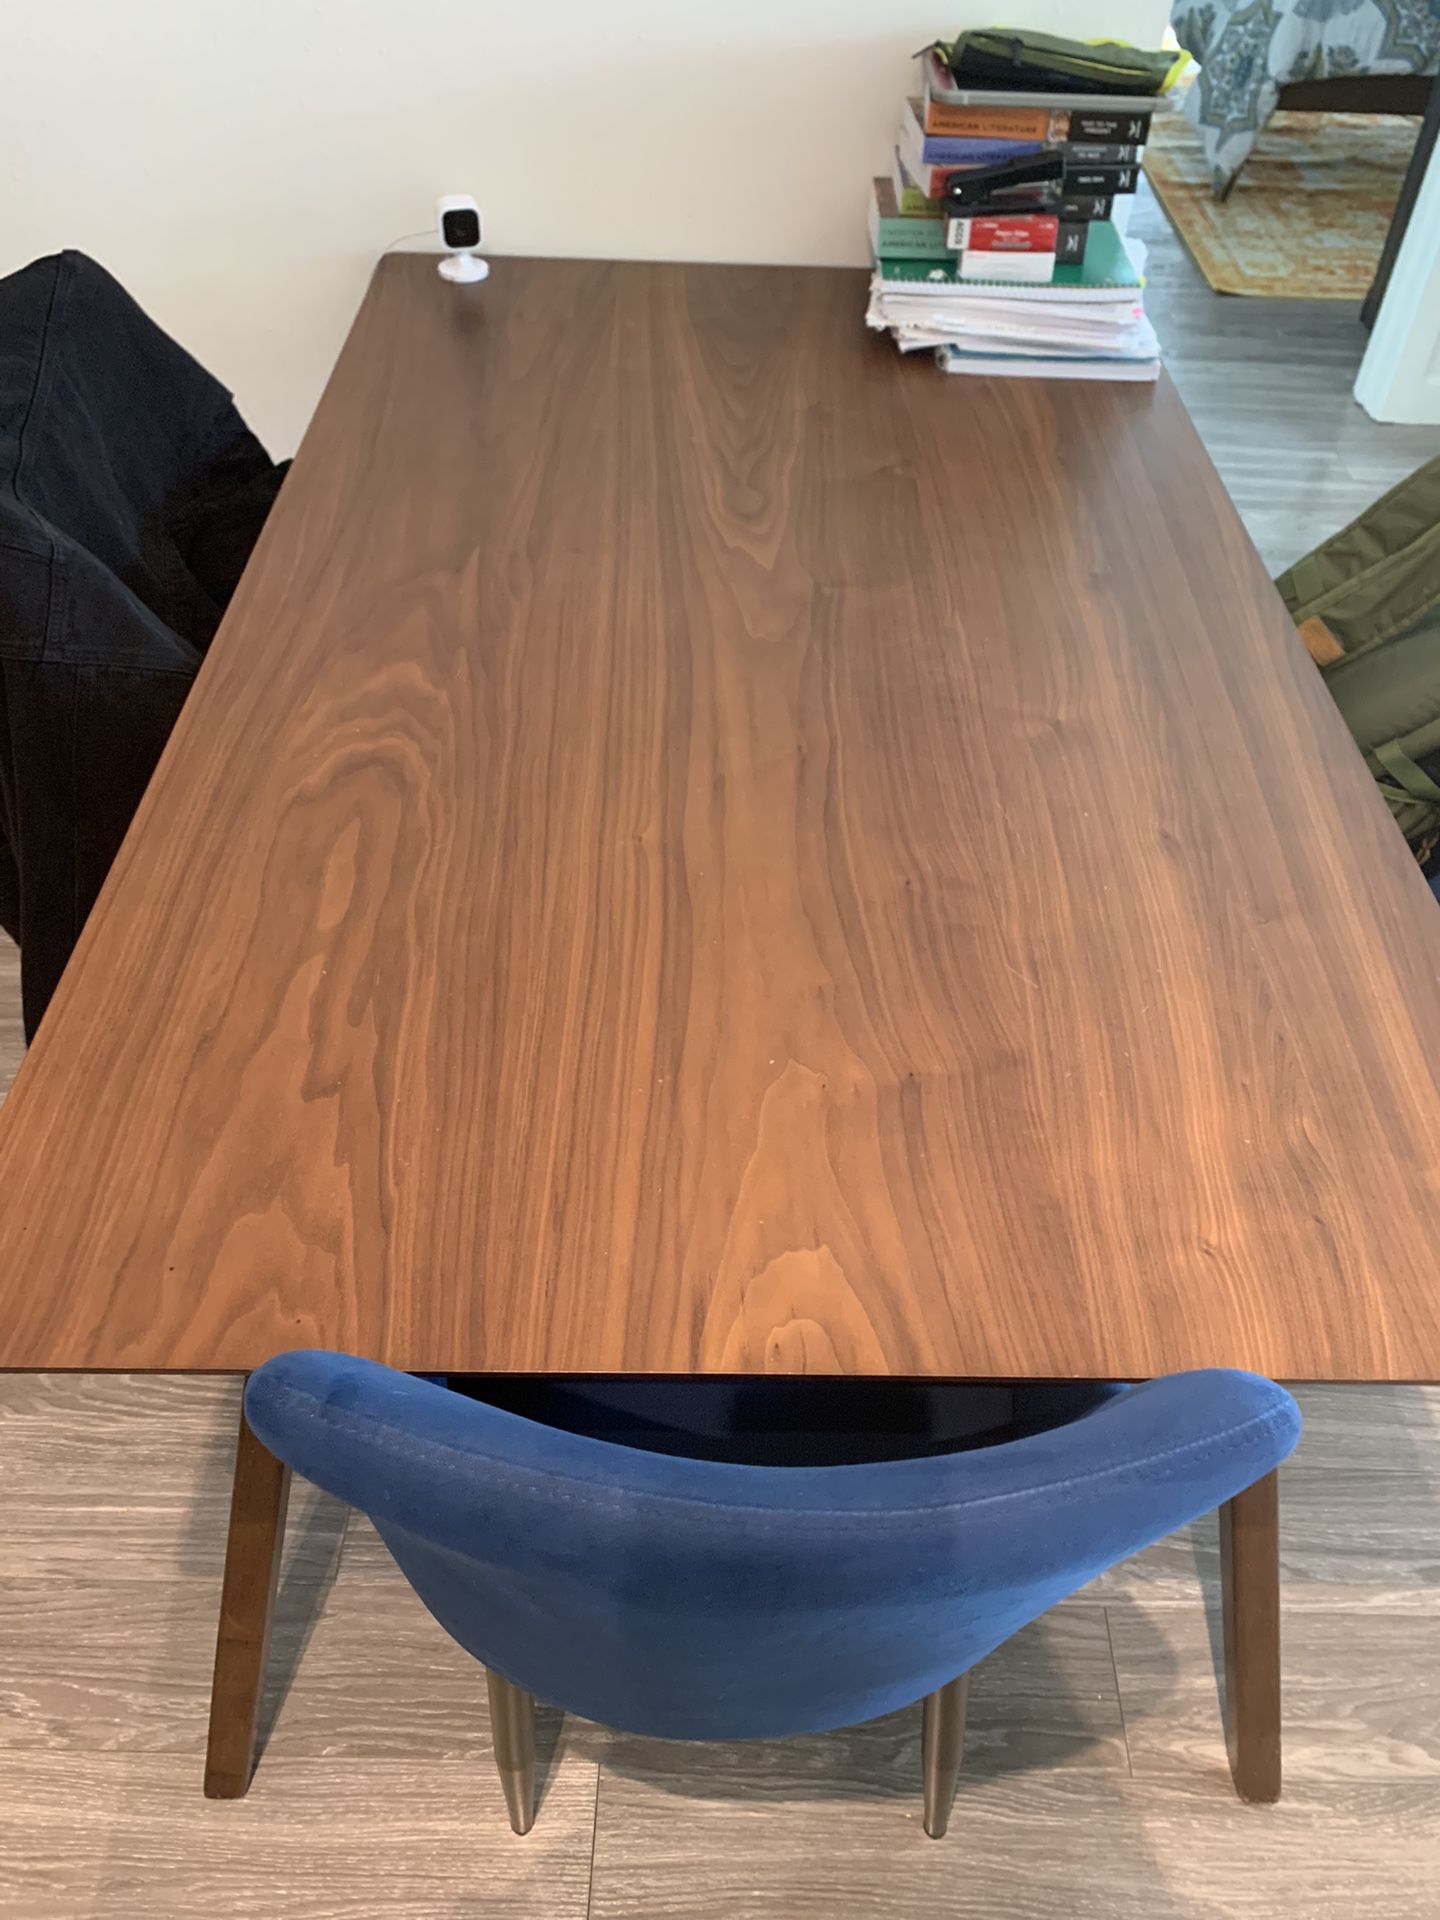  Monahan Dining Table with Chairs